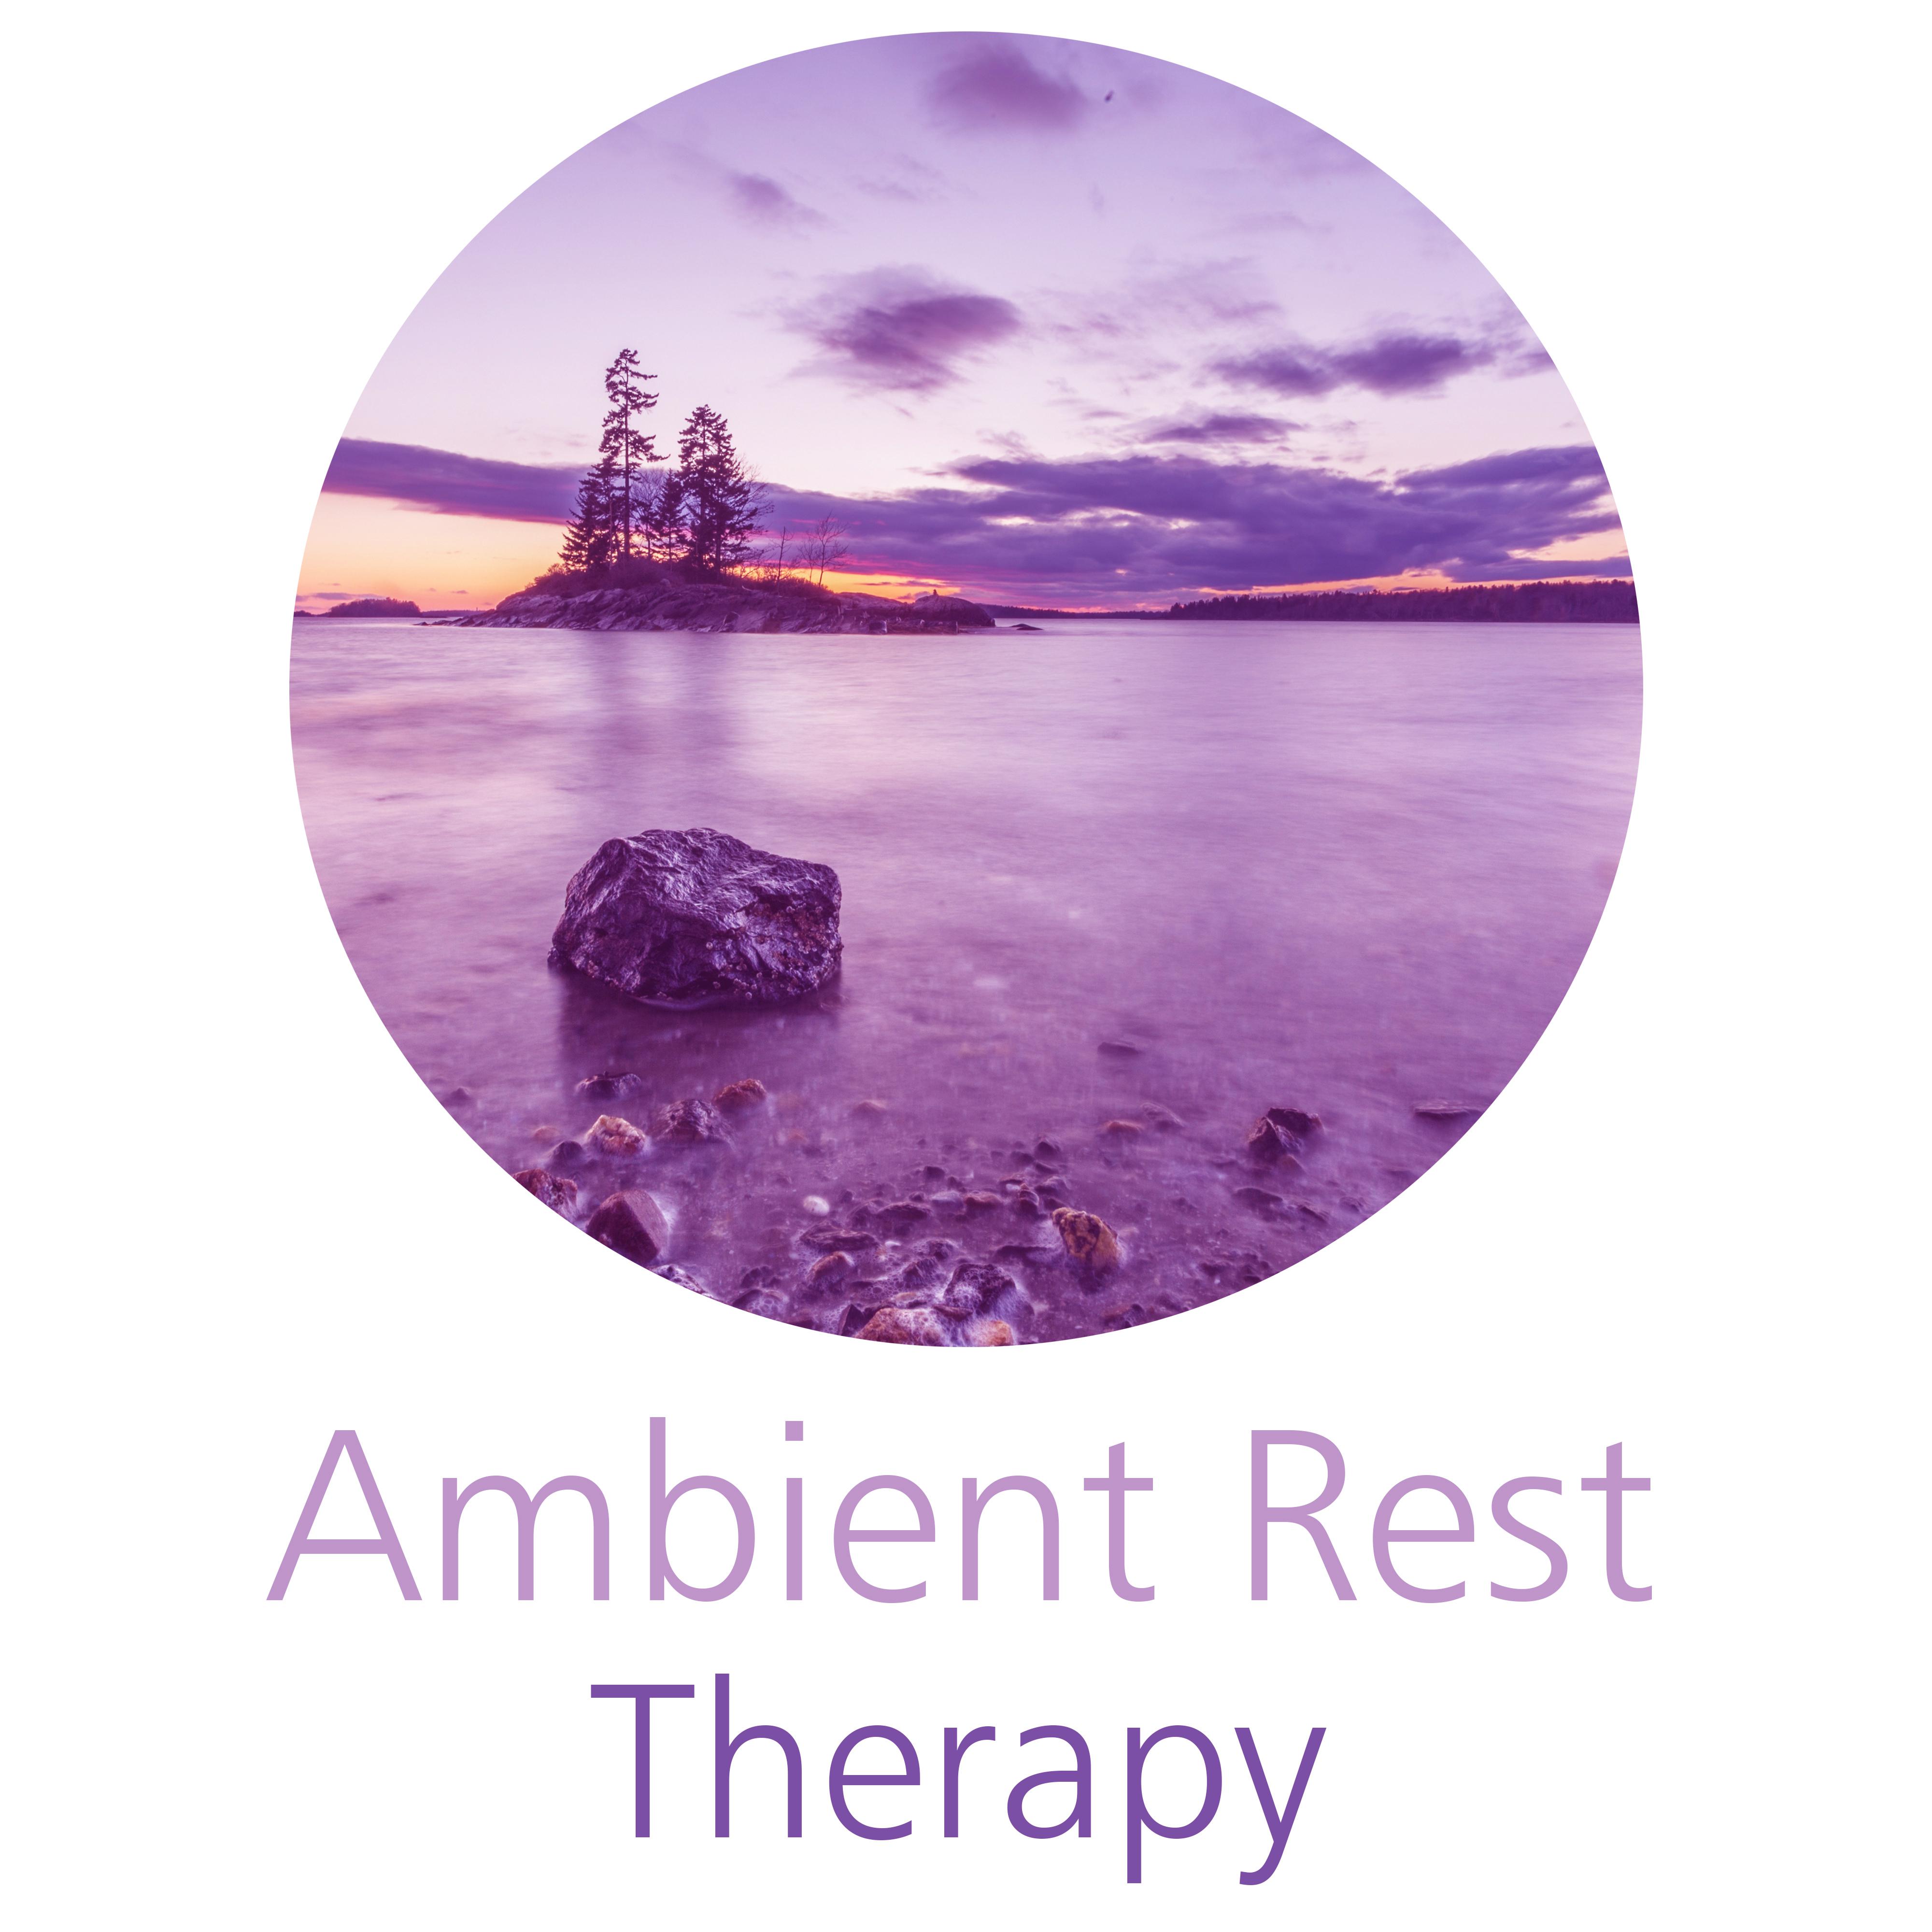 Ambient Rest Therapy  Pure Mind, Best Relaxation, Stress Relief, Soft Nature Sounds to Calm Down, Harmony, Inner Spirit, Deep Sleep